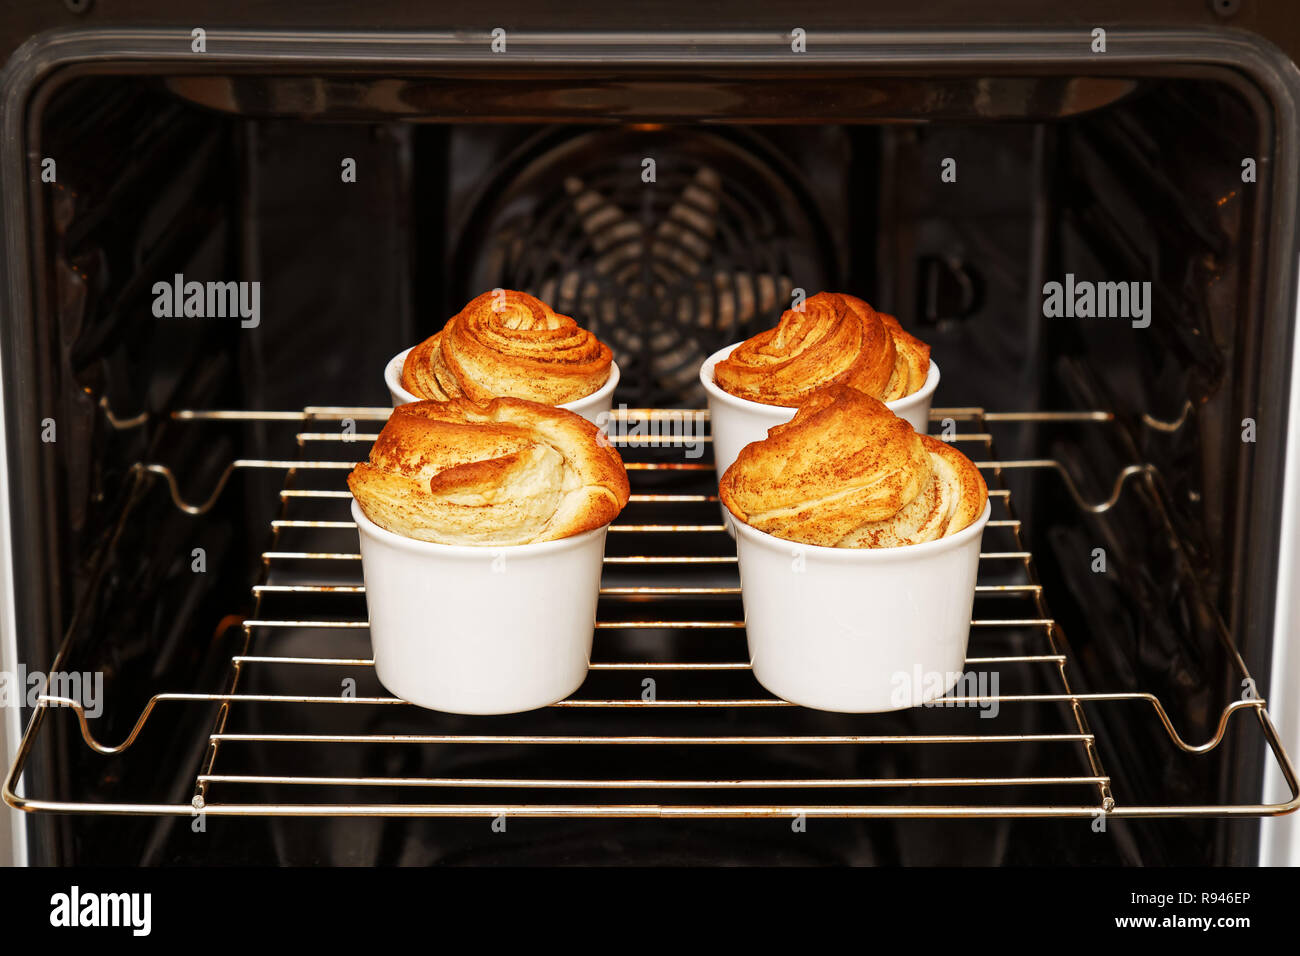 https://c8.alamy.com/comp/R946EP/homemade-cinnamon-rolls-from-yeast-dough-in-white-ceramic-mold-is-baked-in-the-oven-R946EP.jpg